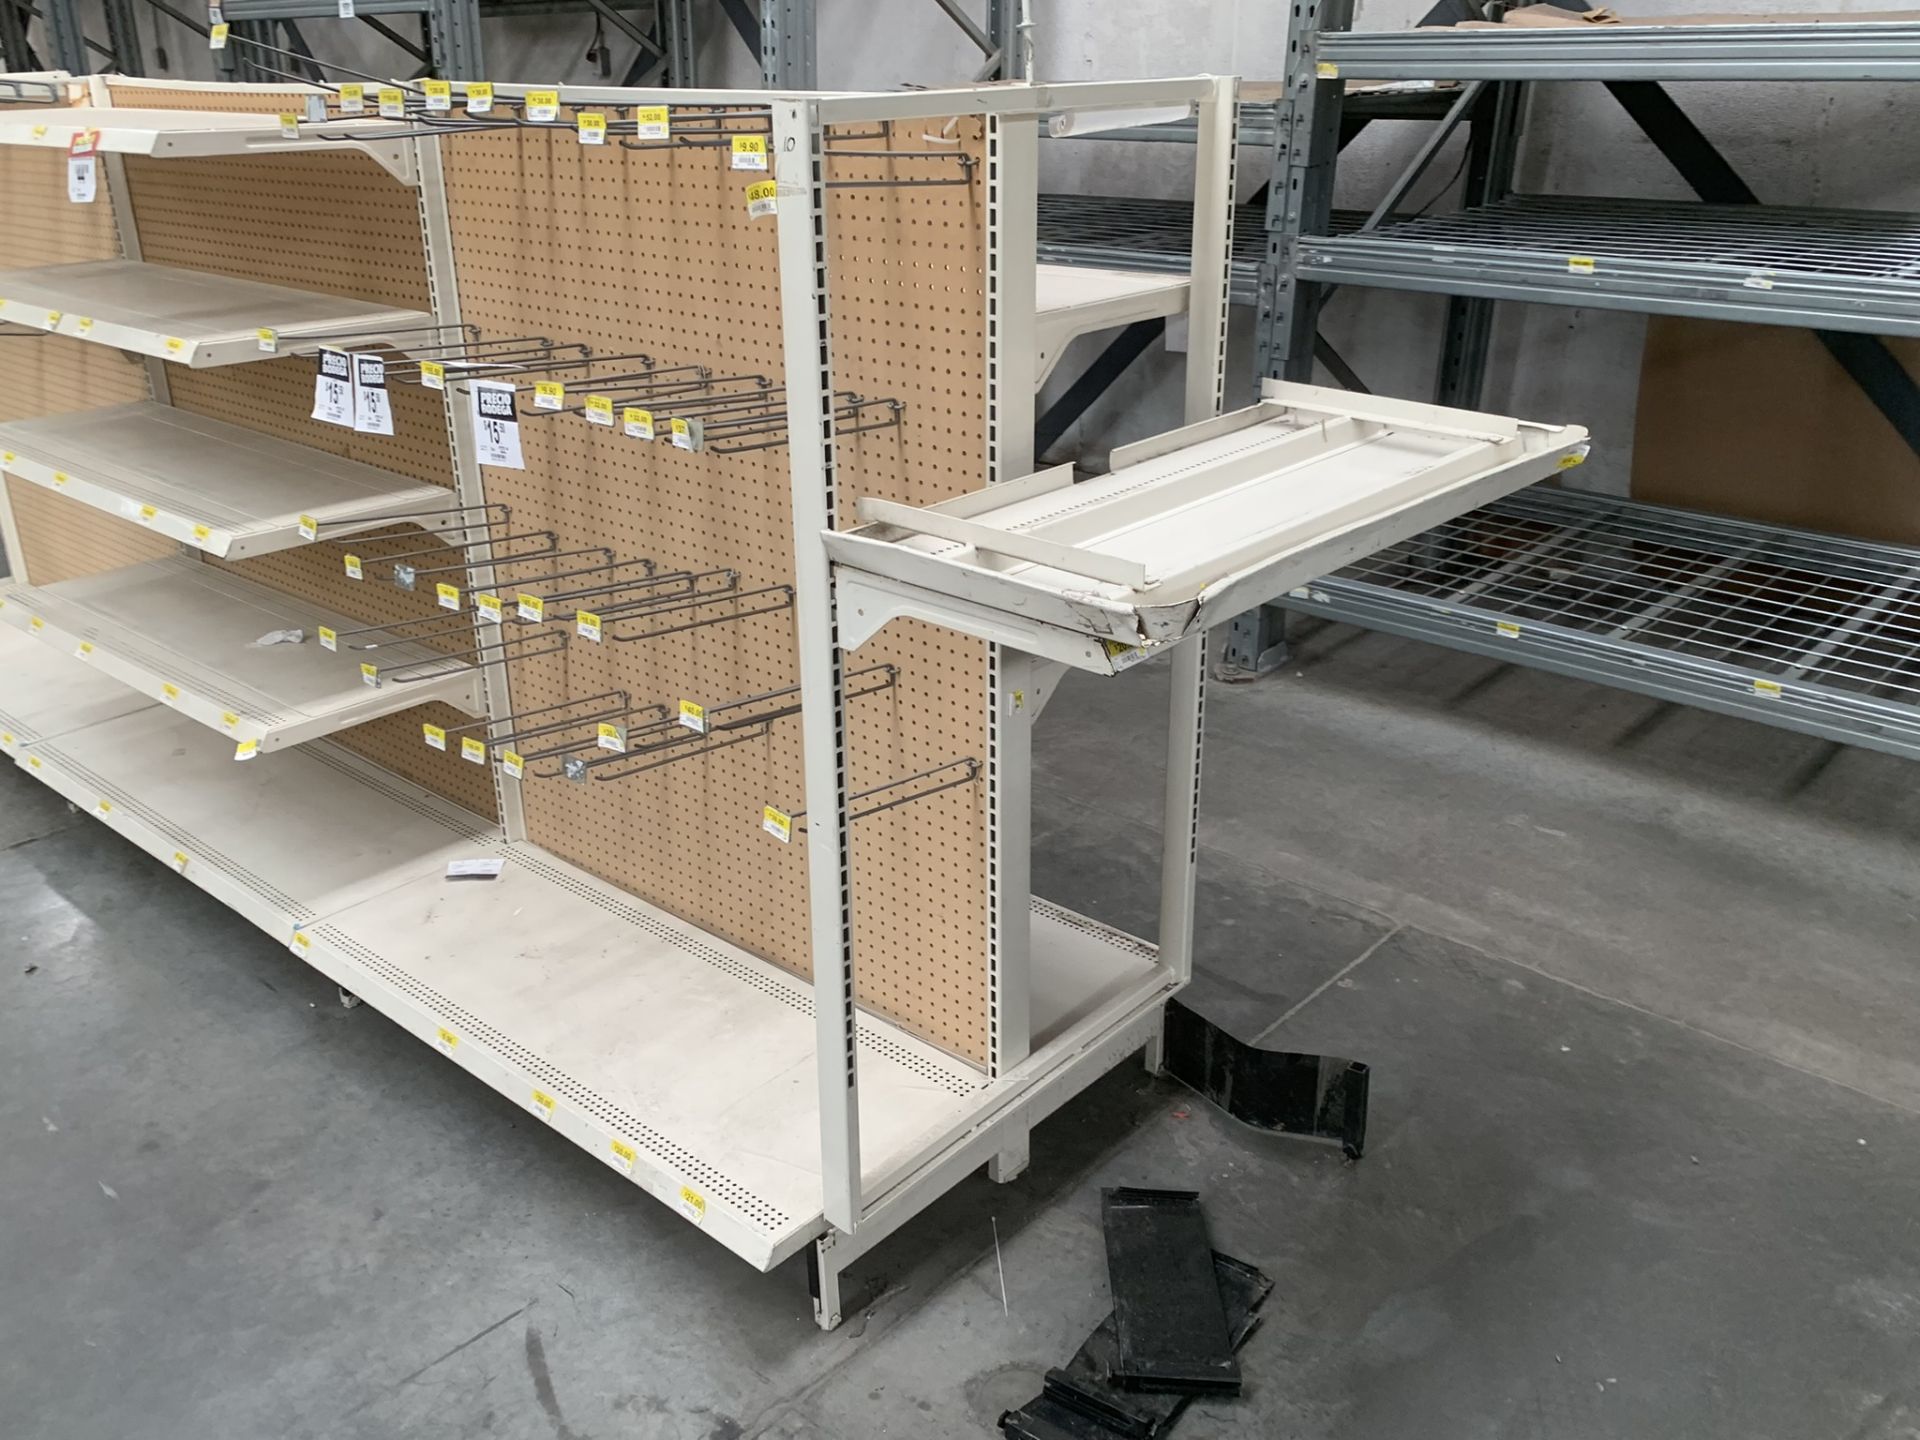 2 gondola-type display cabinet measures 3.80 x 0.91 x 1.55 that are made up of 10 posts and 37 trays - Image 31 of 35